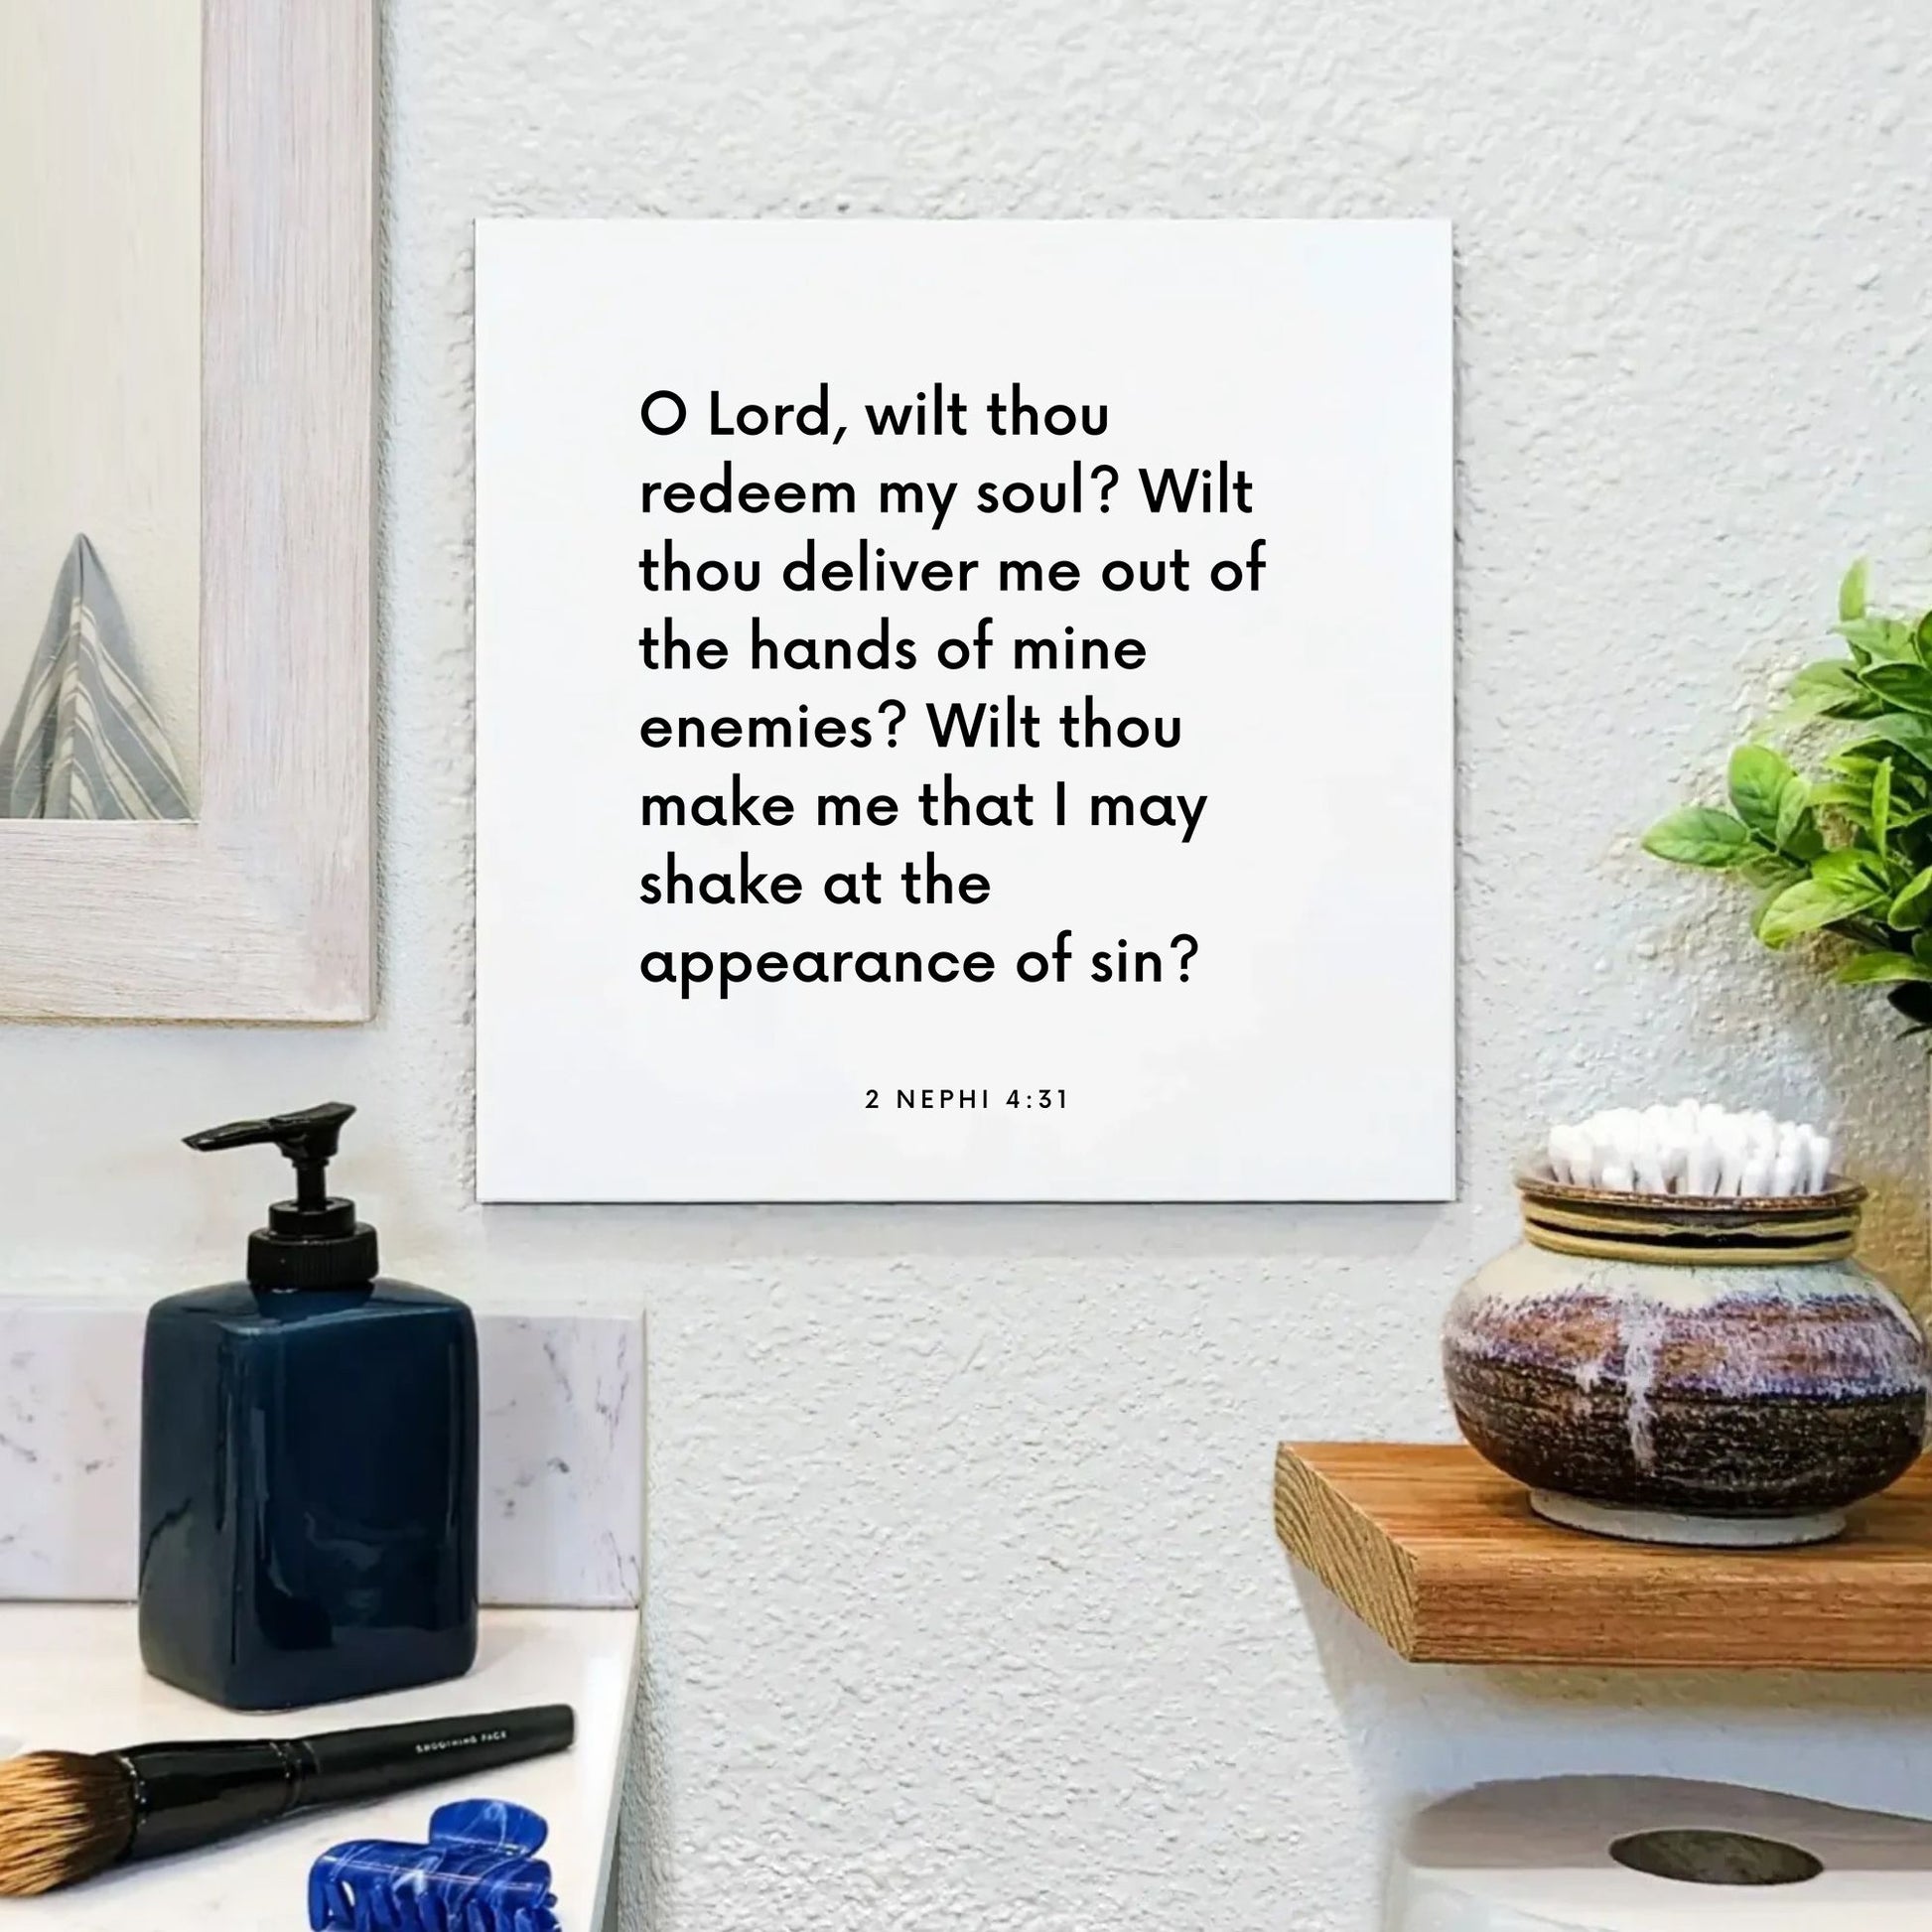 Bathroom mouting of the scripture tile for 2 Nephi 4:31 - "Lord, wilt thou redeem my soul?"